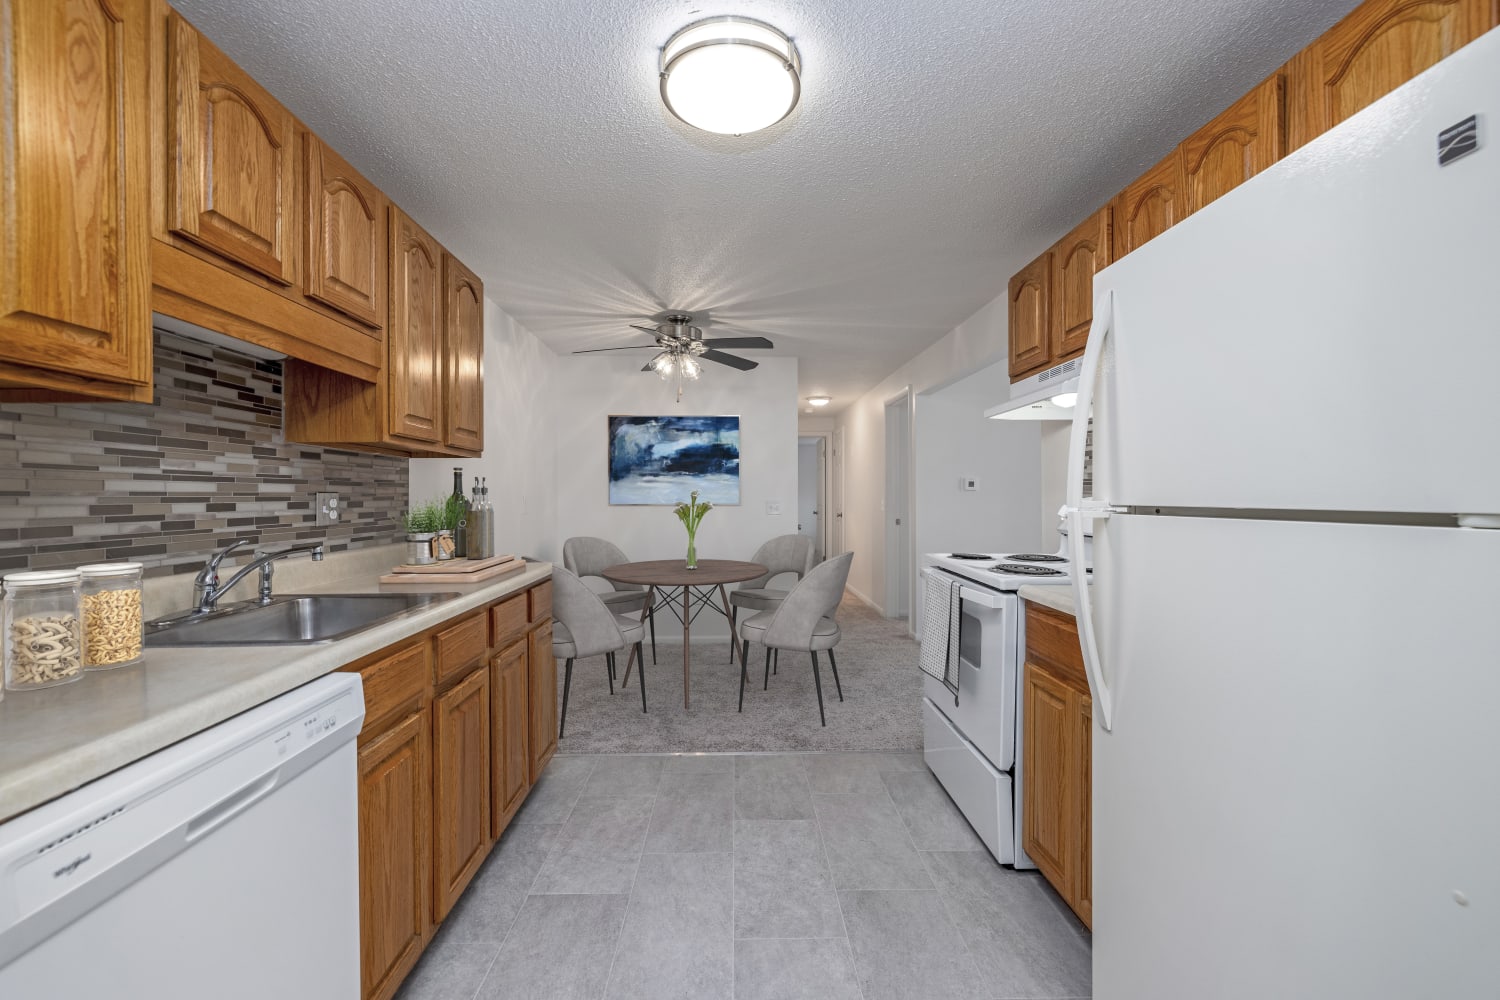 Kitchen with white appliances at Perinton Manor Apartments in Fairport, New York